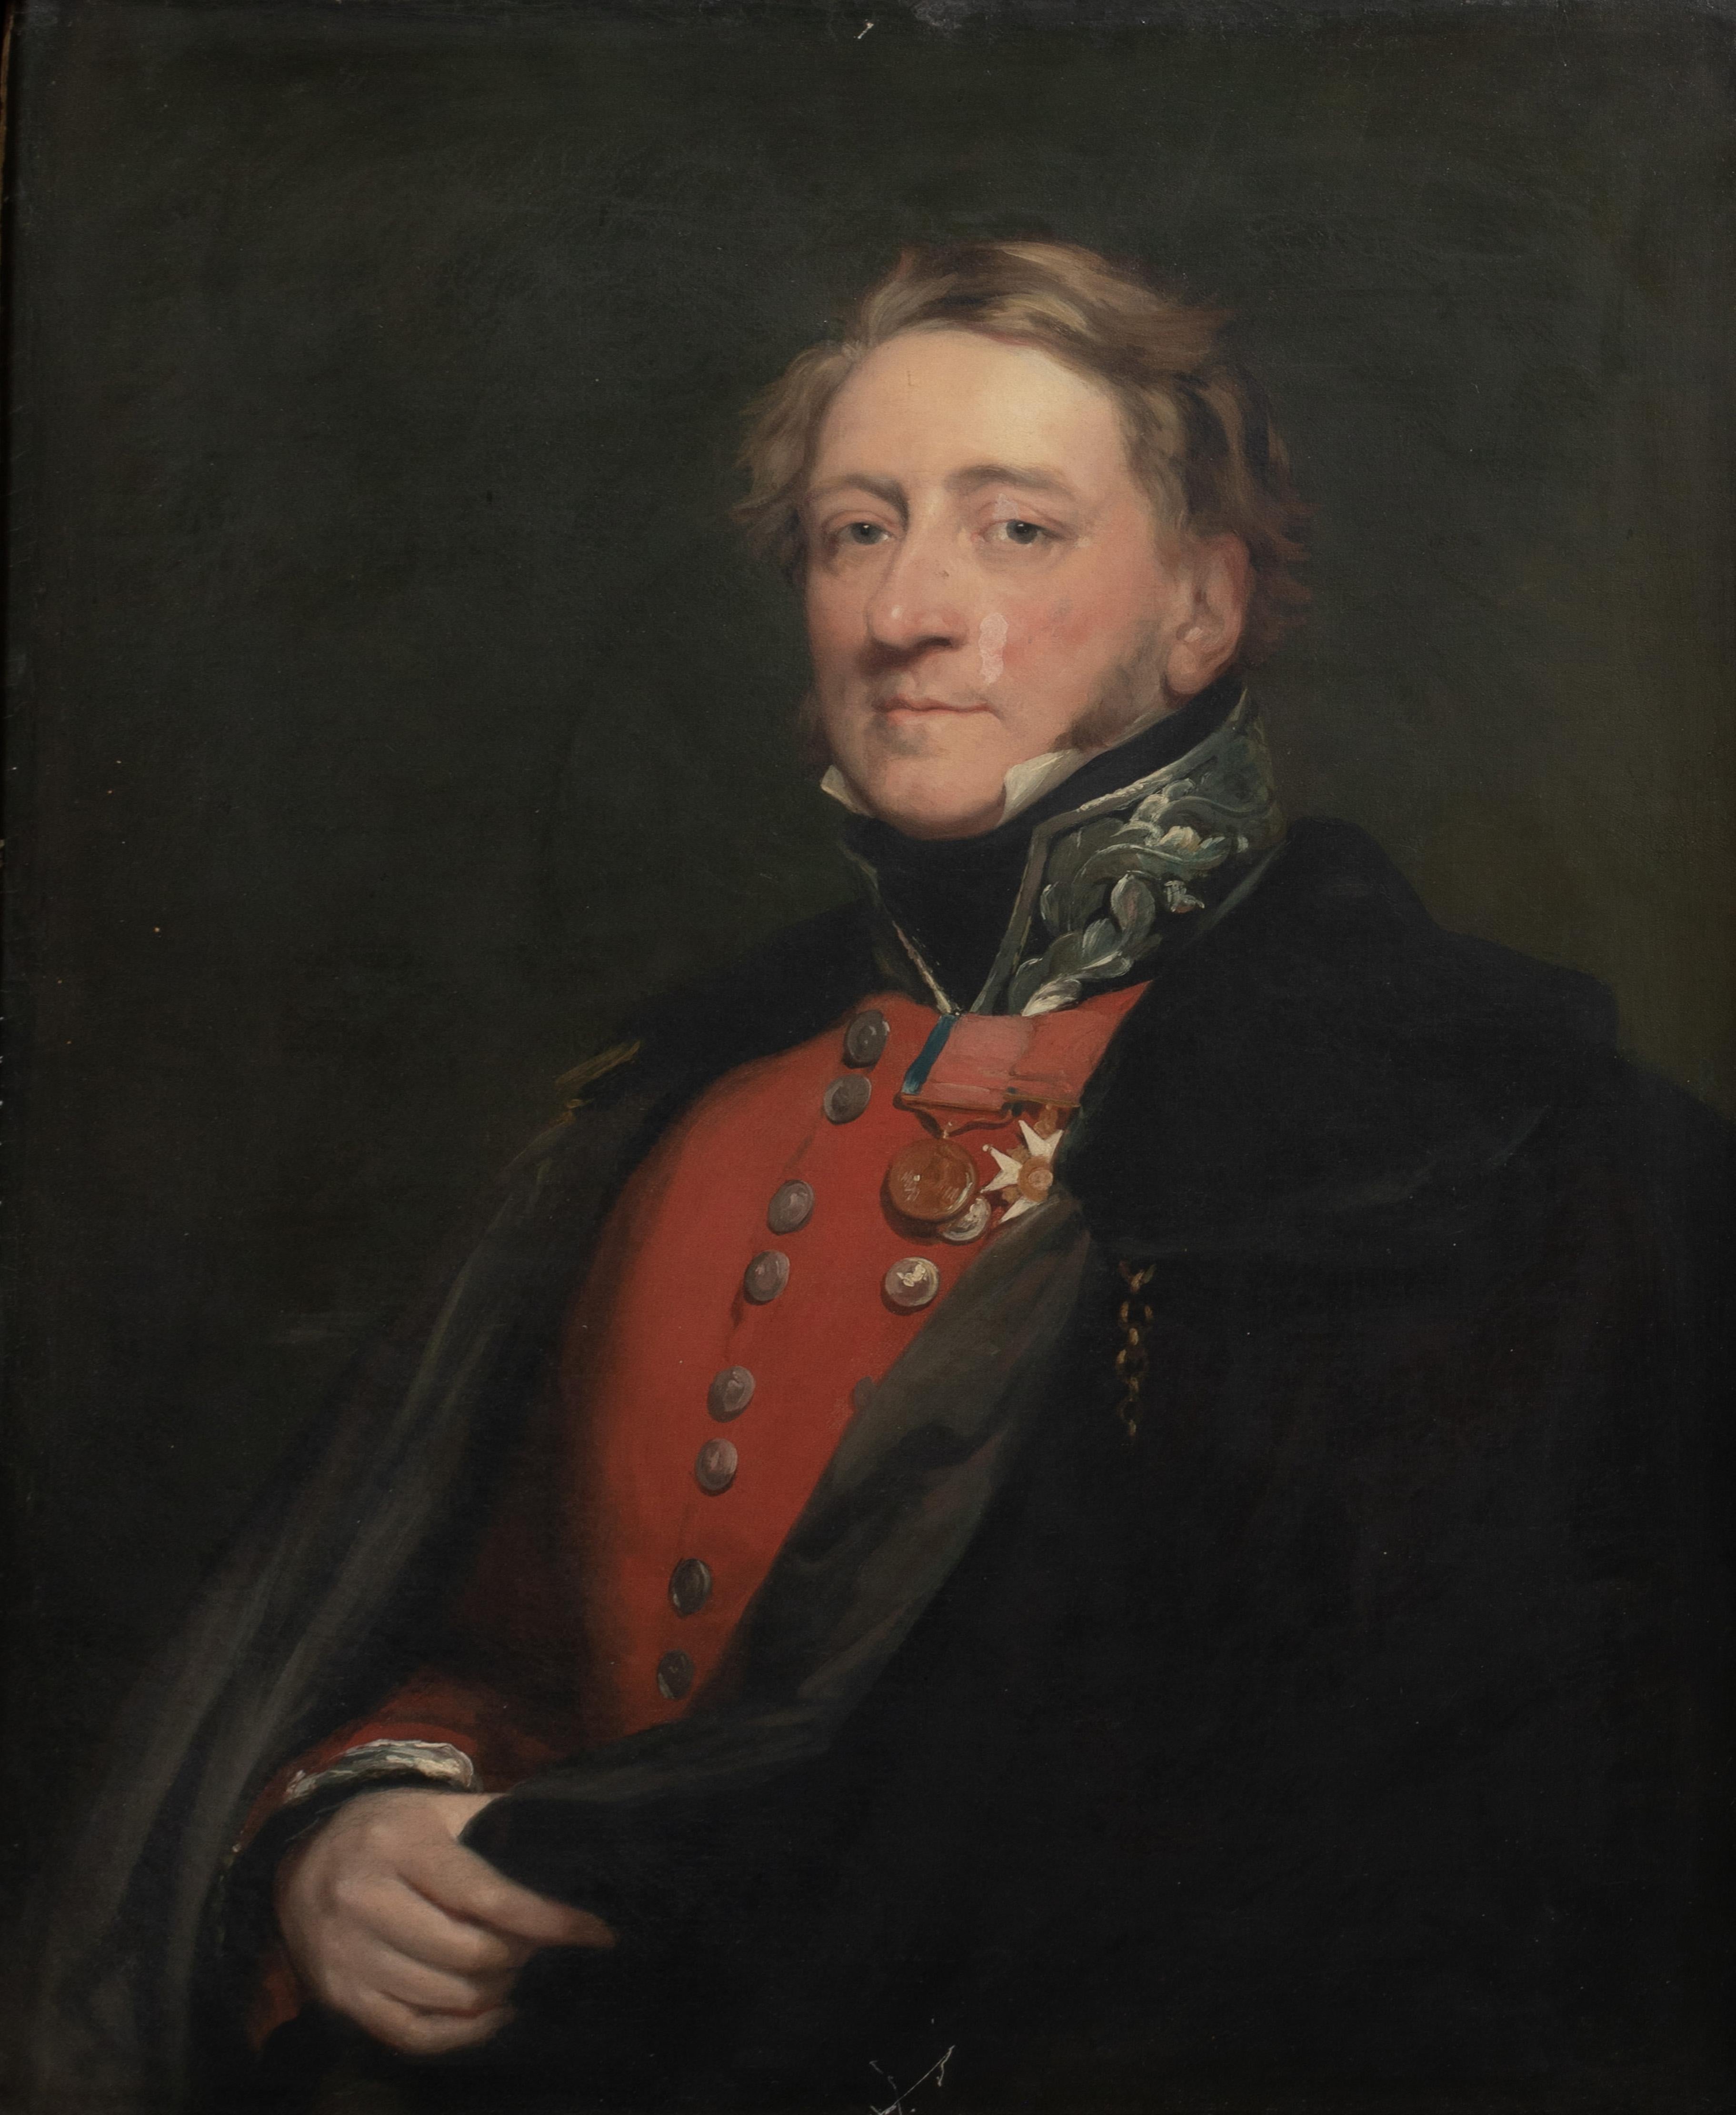 Sir Thomas Lawrence Portrait Painting - Portrait of A British Officer, traditionally identified as Leiutentant-General S